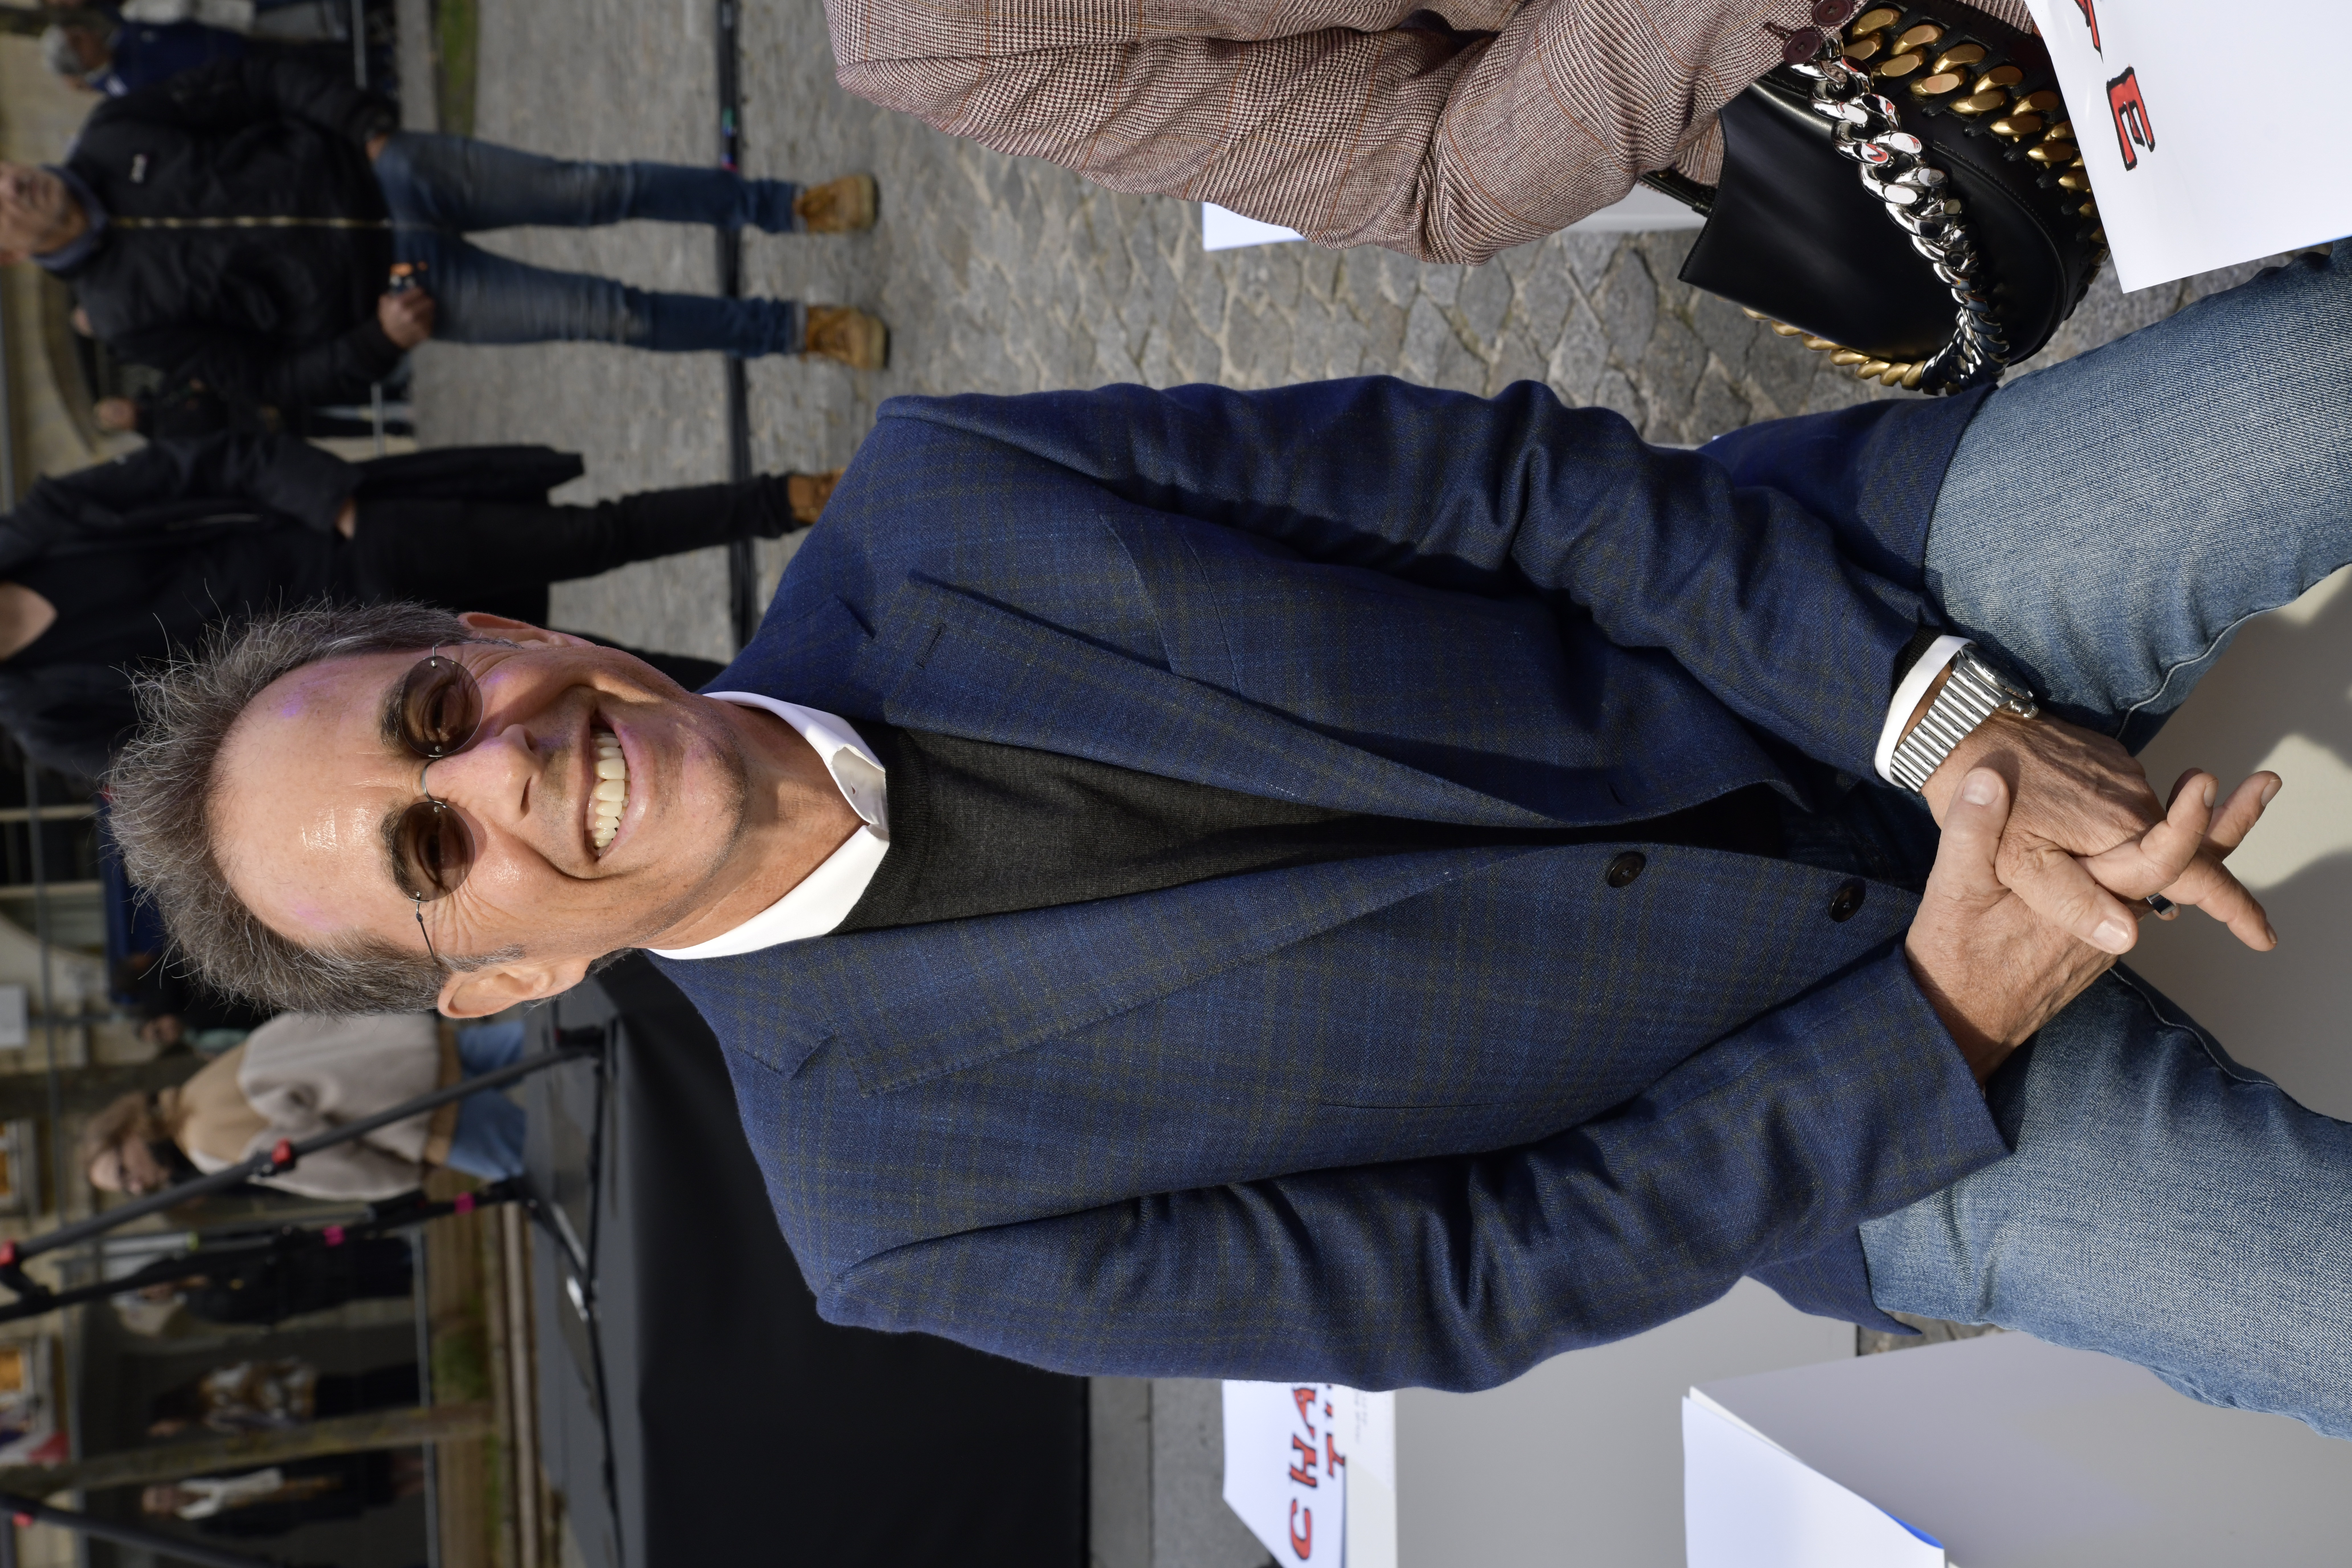 Jerry Seinfeld at the Stella McCartney fashion show on October 3, 2022, in Paris, France. | Source: Getty Images